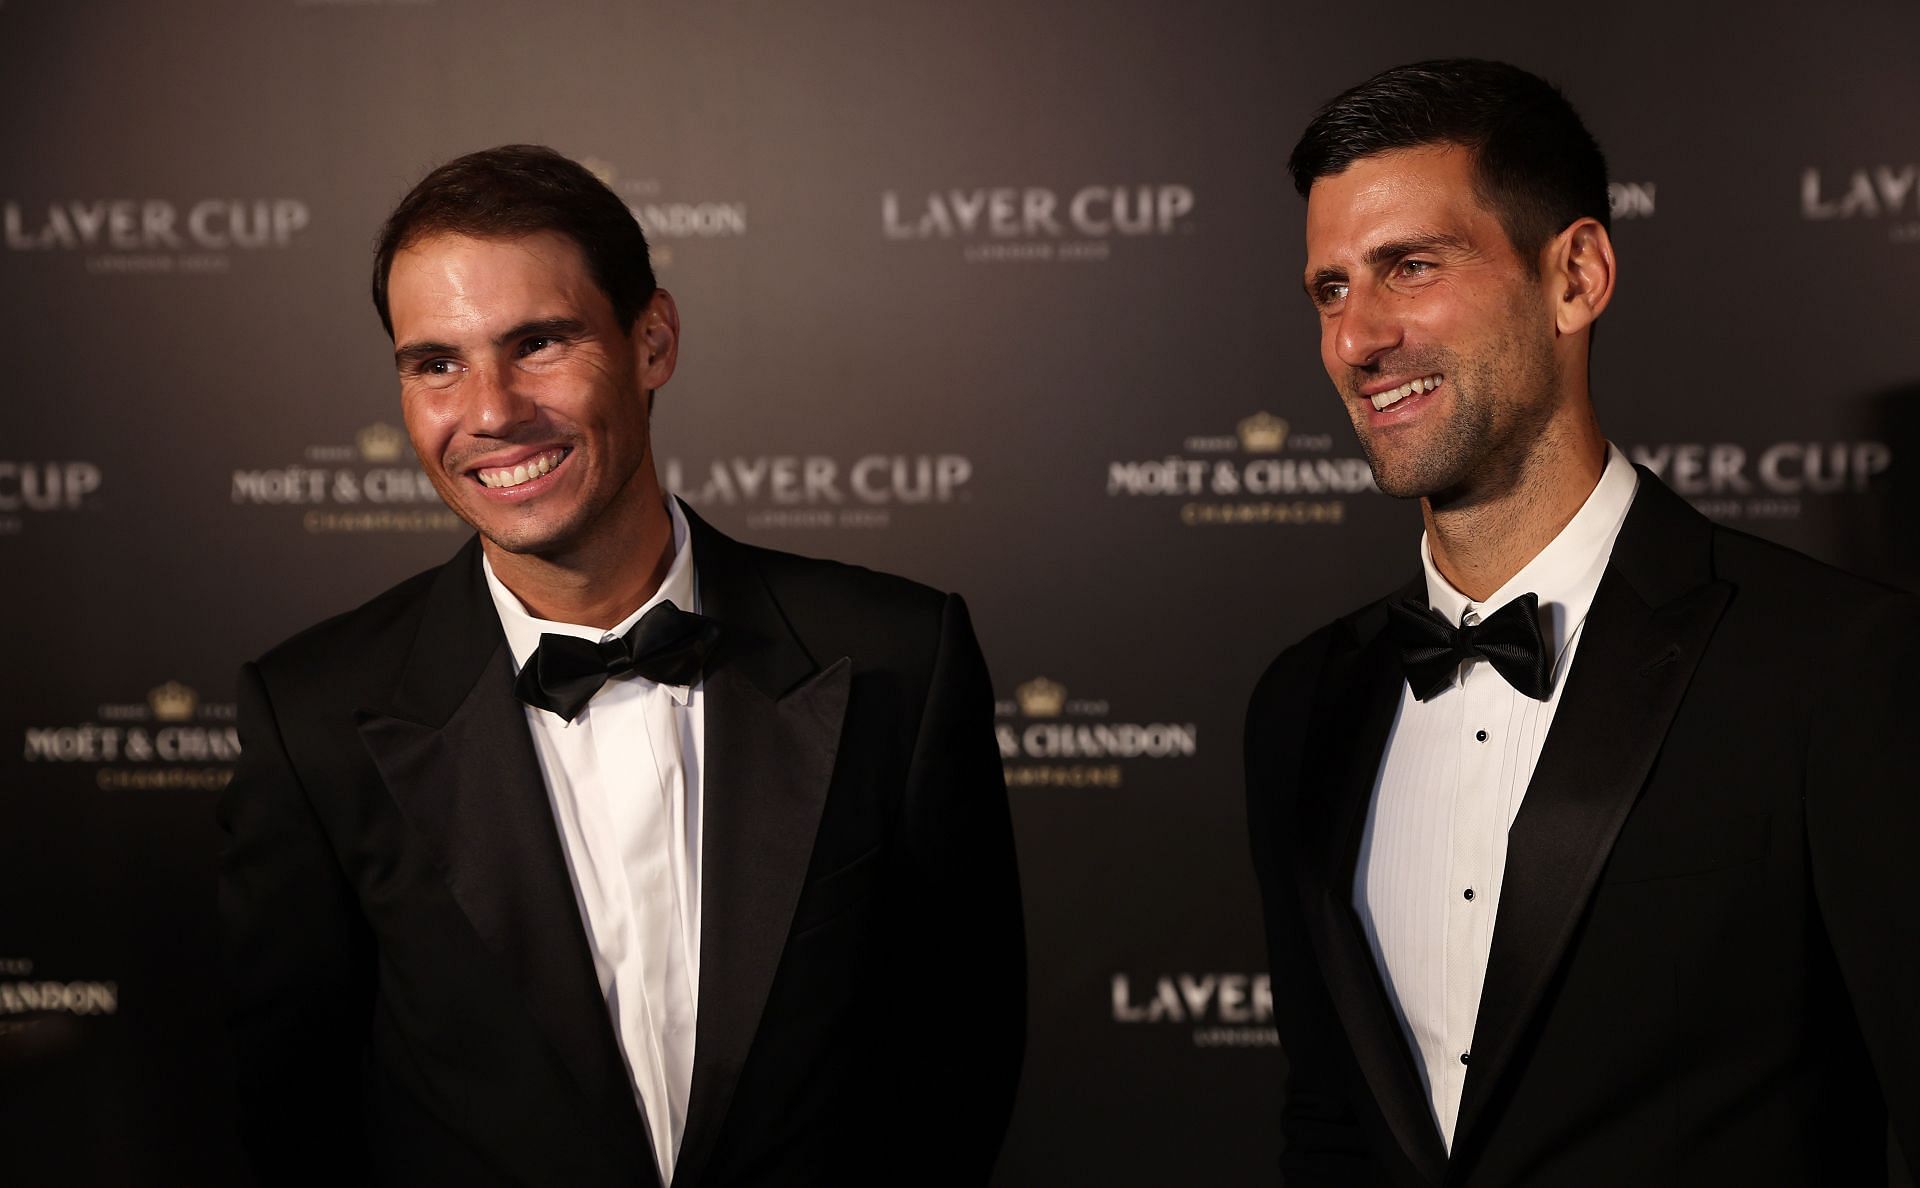 Rafael Nadal and Novak Djokovic pictured at the Laver Cup 2022